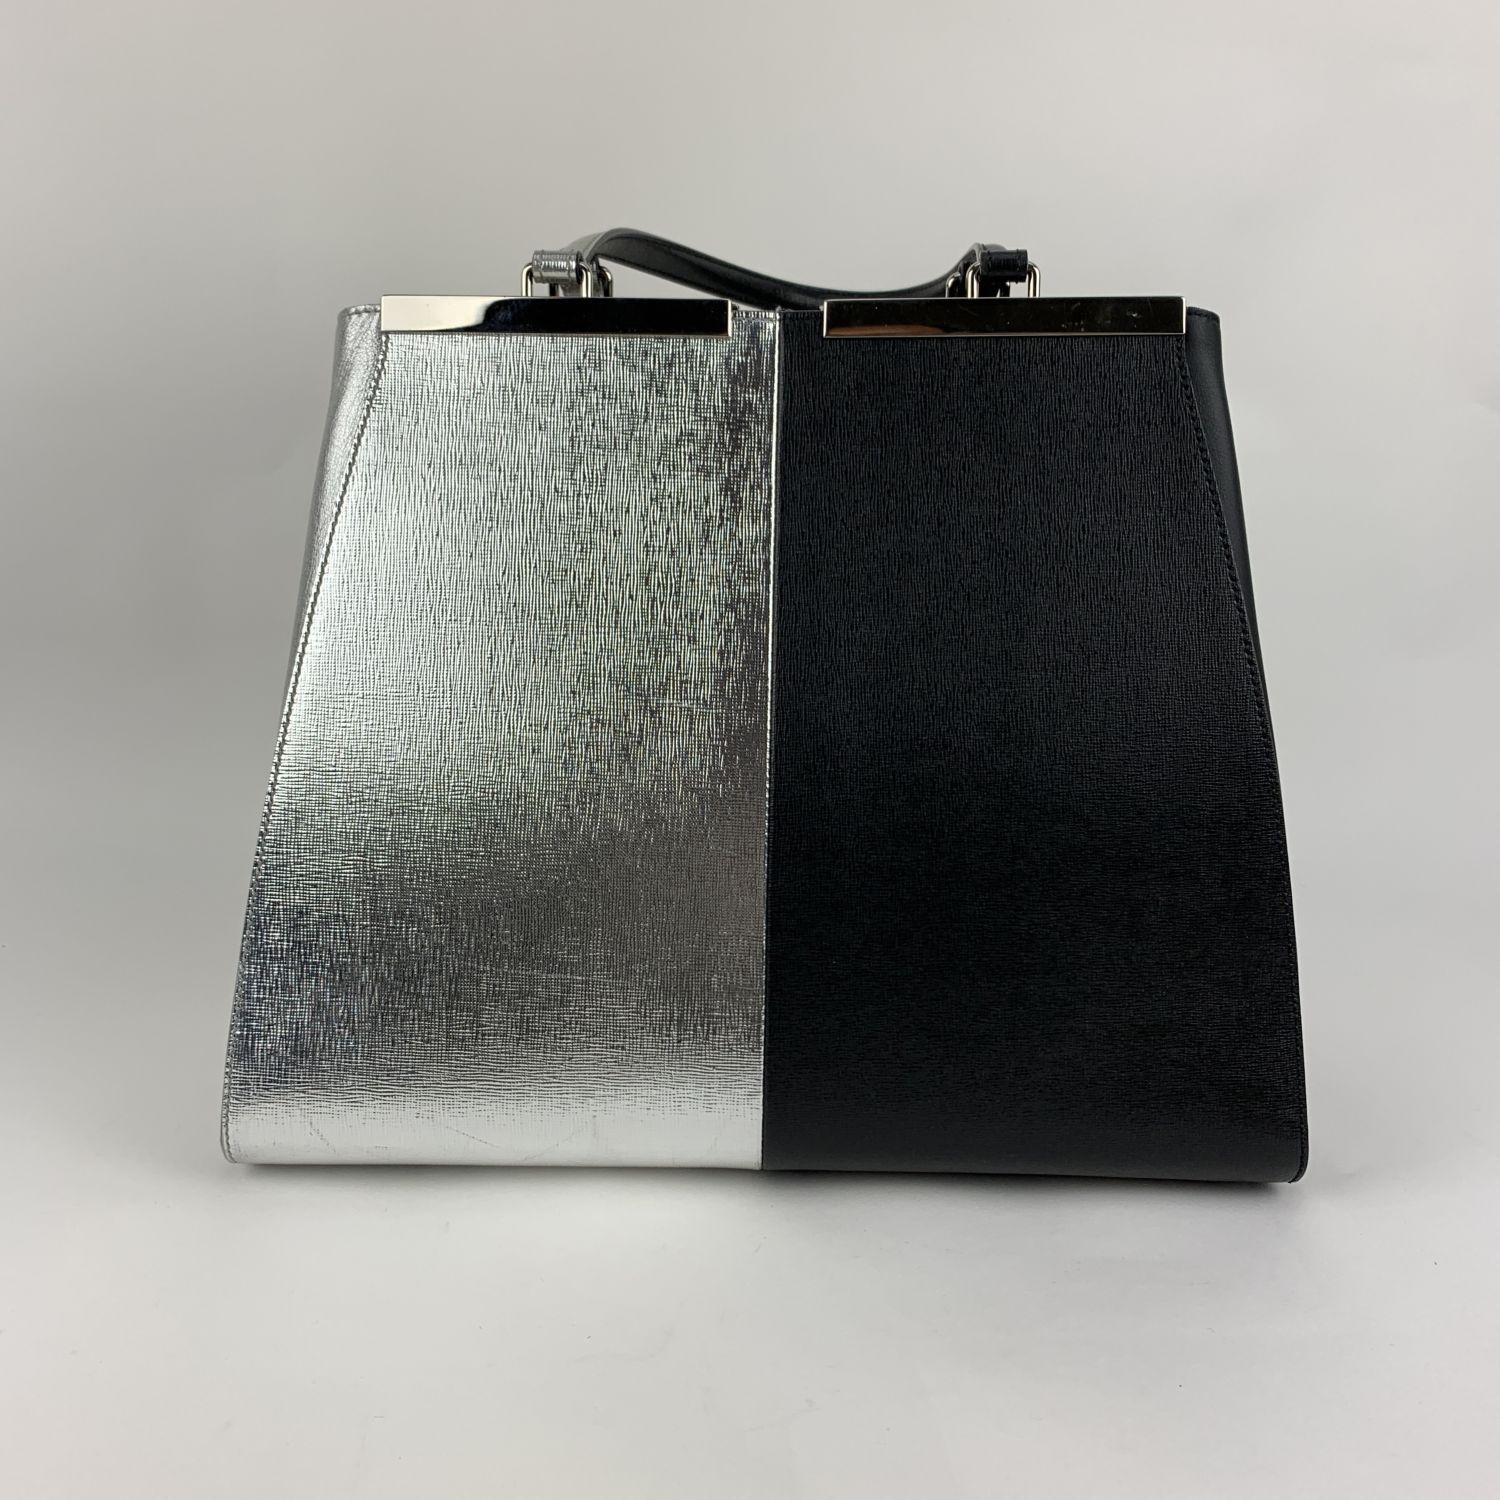 Fendi Bicolor Black and Silver Leather 3Jours Tote Shopping Bag 1